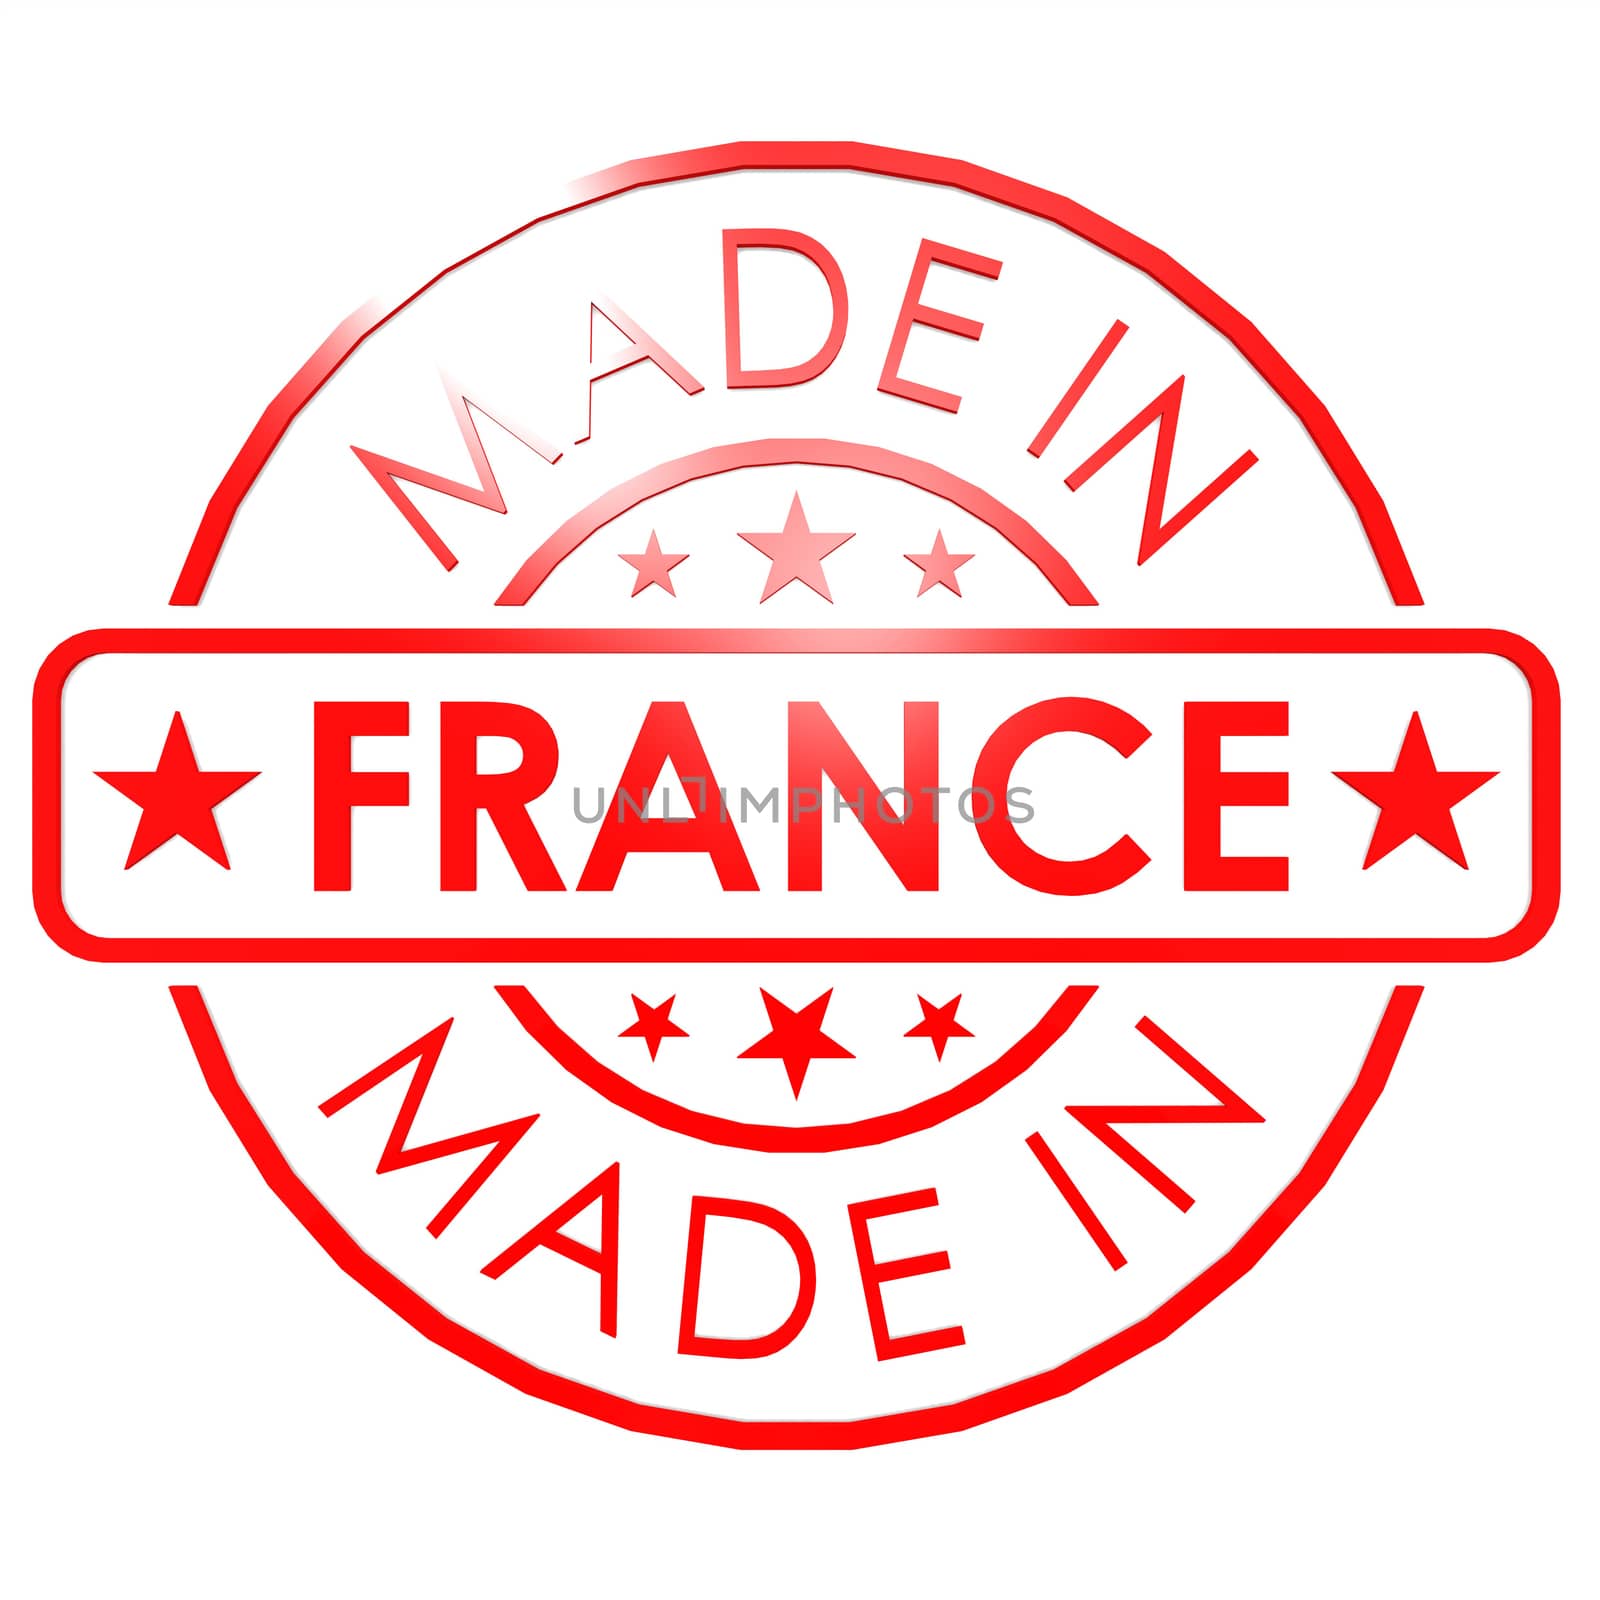 Made in France red seal by tang90246